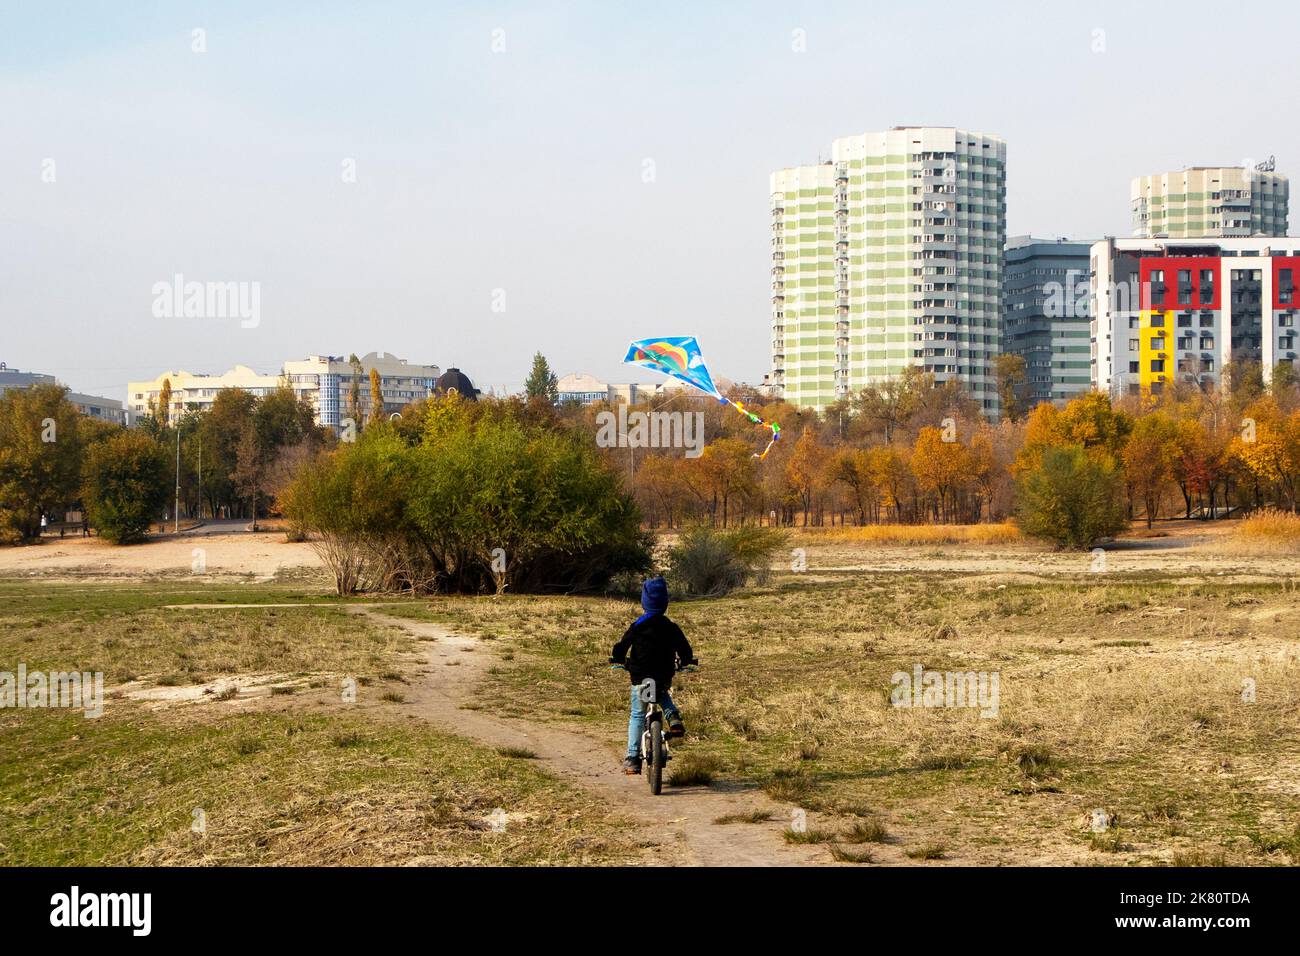 a boy rides a bicycle with a kite Stock Photo